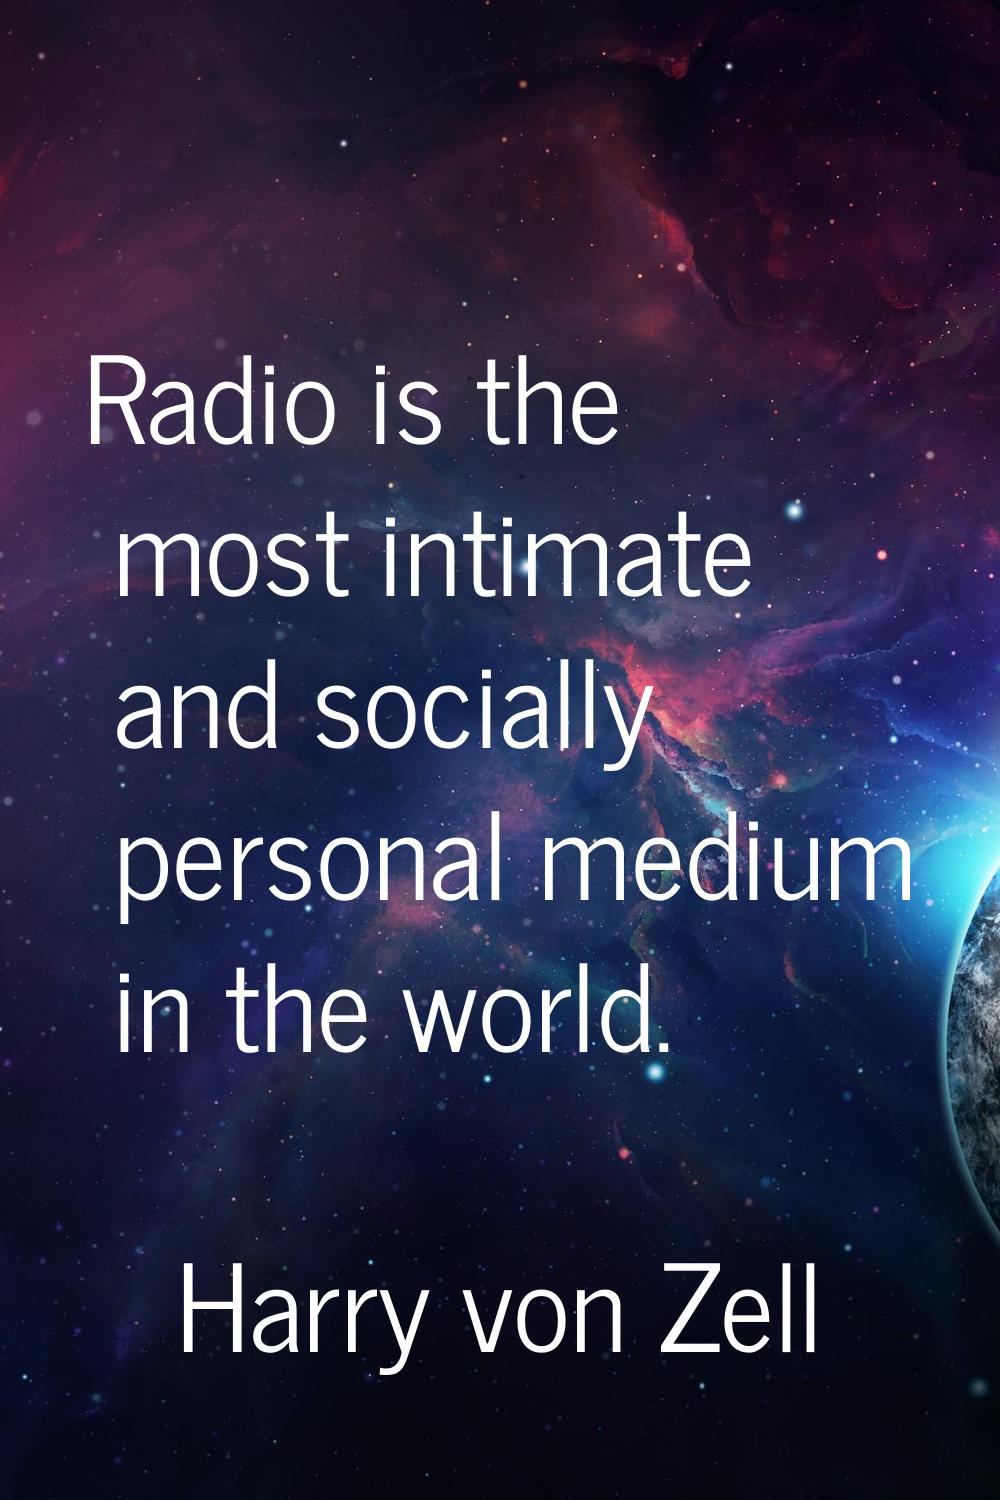 Radio is the most intimate and socially personal medium in the world.